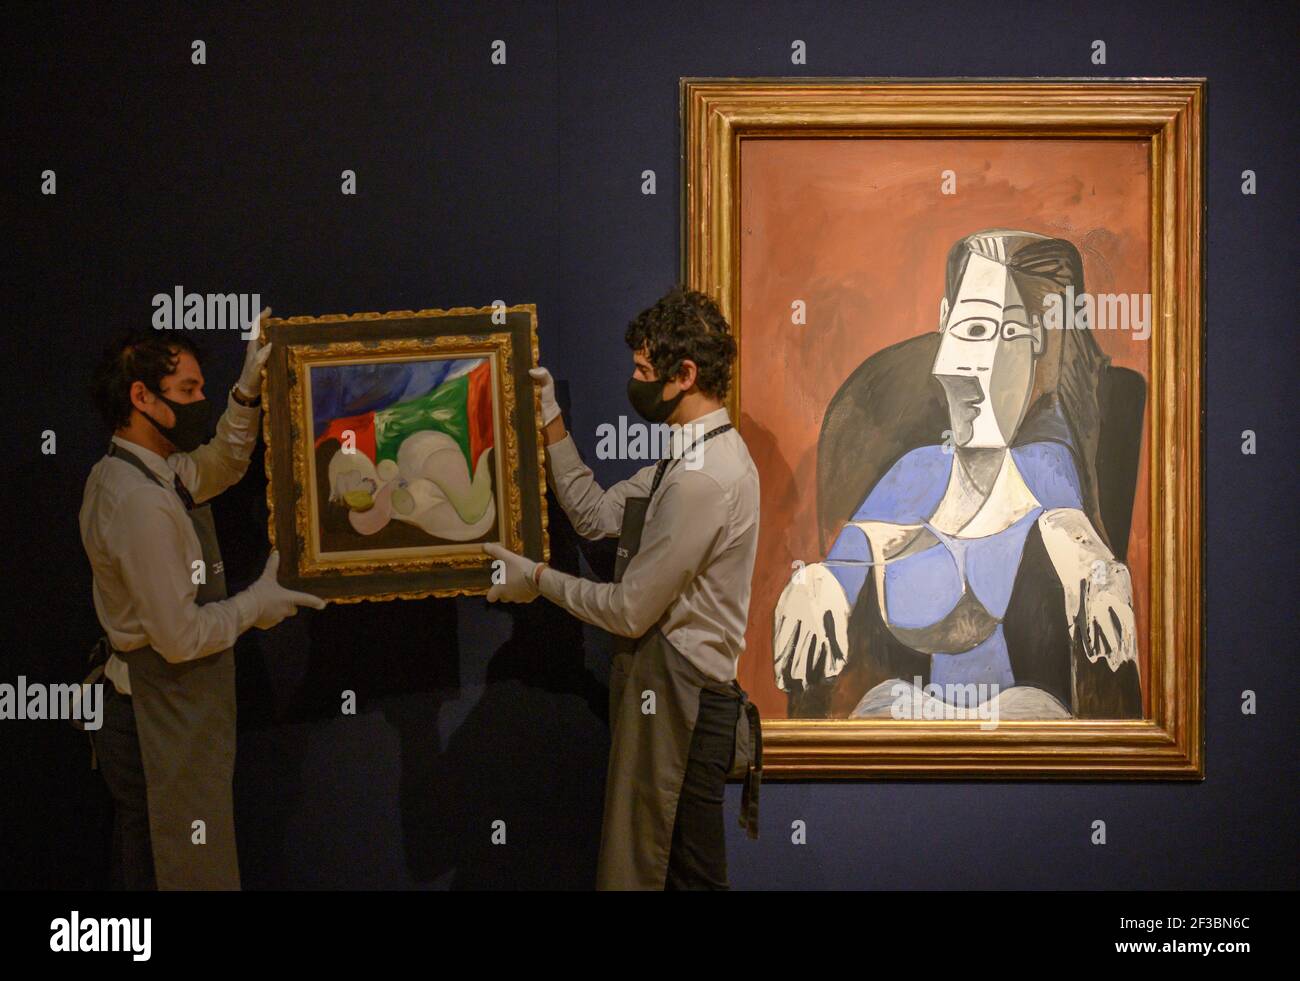 Christies, London, UK. 16 March 2021. Preparations behind closed doors for the livestreamed 20th Century Art evening sale and The Art of the Surreal sale 23 March. The sale is led by Pablo Picasso’s Femme nue couchée au collier (Marie-Therese), (1932), estimate of £9,000,000-£15,000,000, seen in front of Pablo Picasso, Femme assise dans un fauteuil noir (Jacqueline), (1962), estimate of £6,000,000-£9,000,000. Credit: Malcolm Park/Alamy Live News. Stock Photo